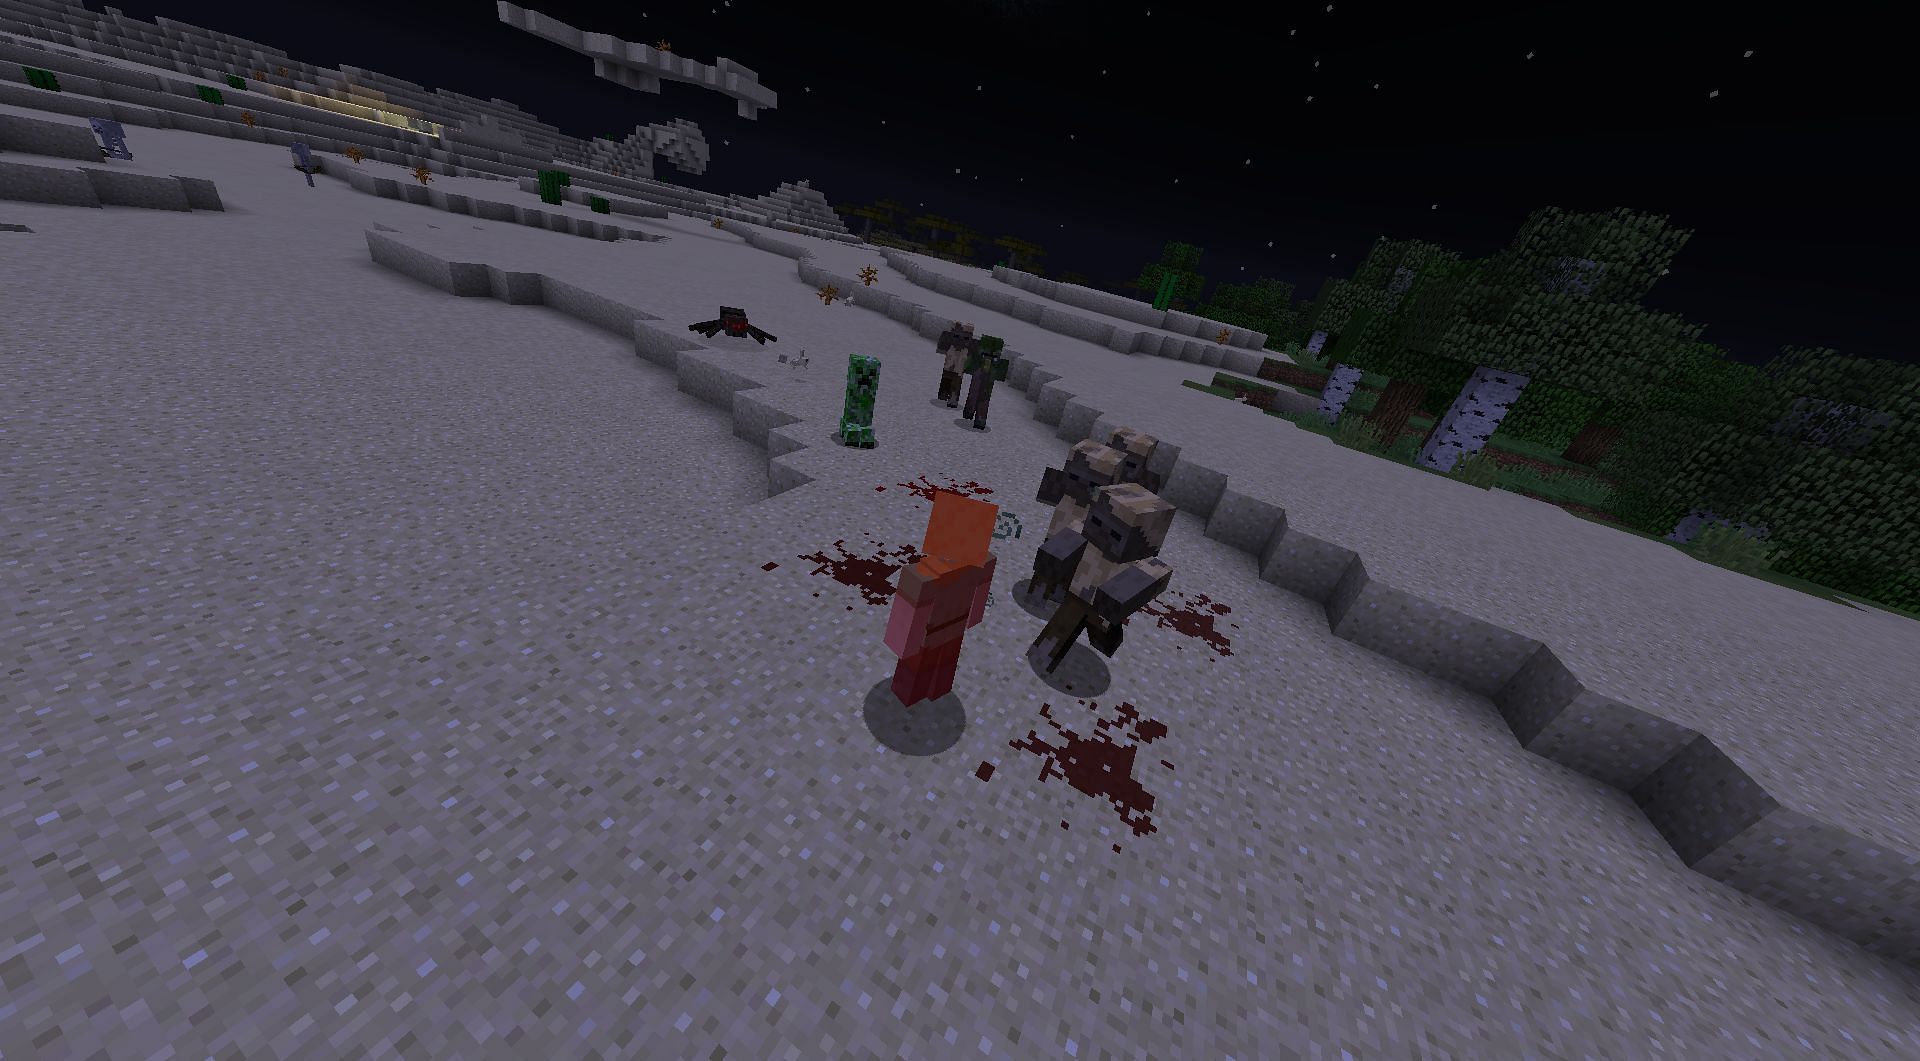 Zombies will have better A.I. through this Minecraft mod (Image via Mojang)